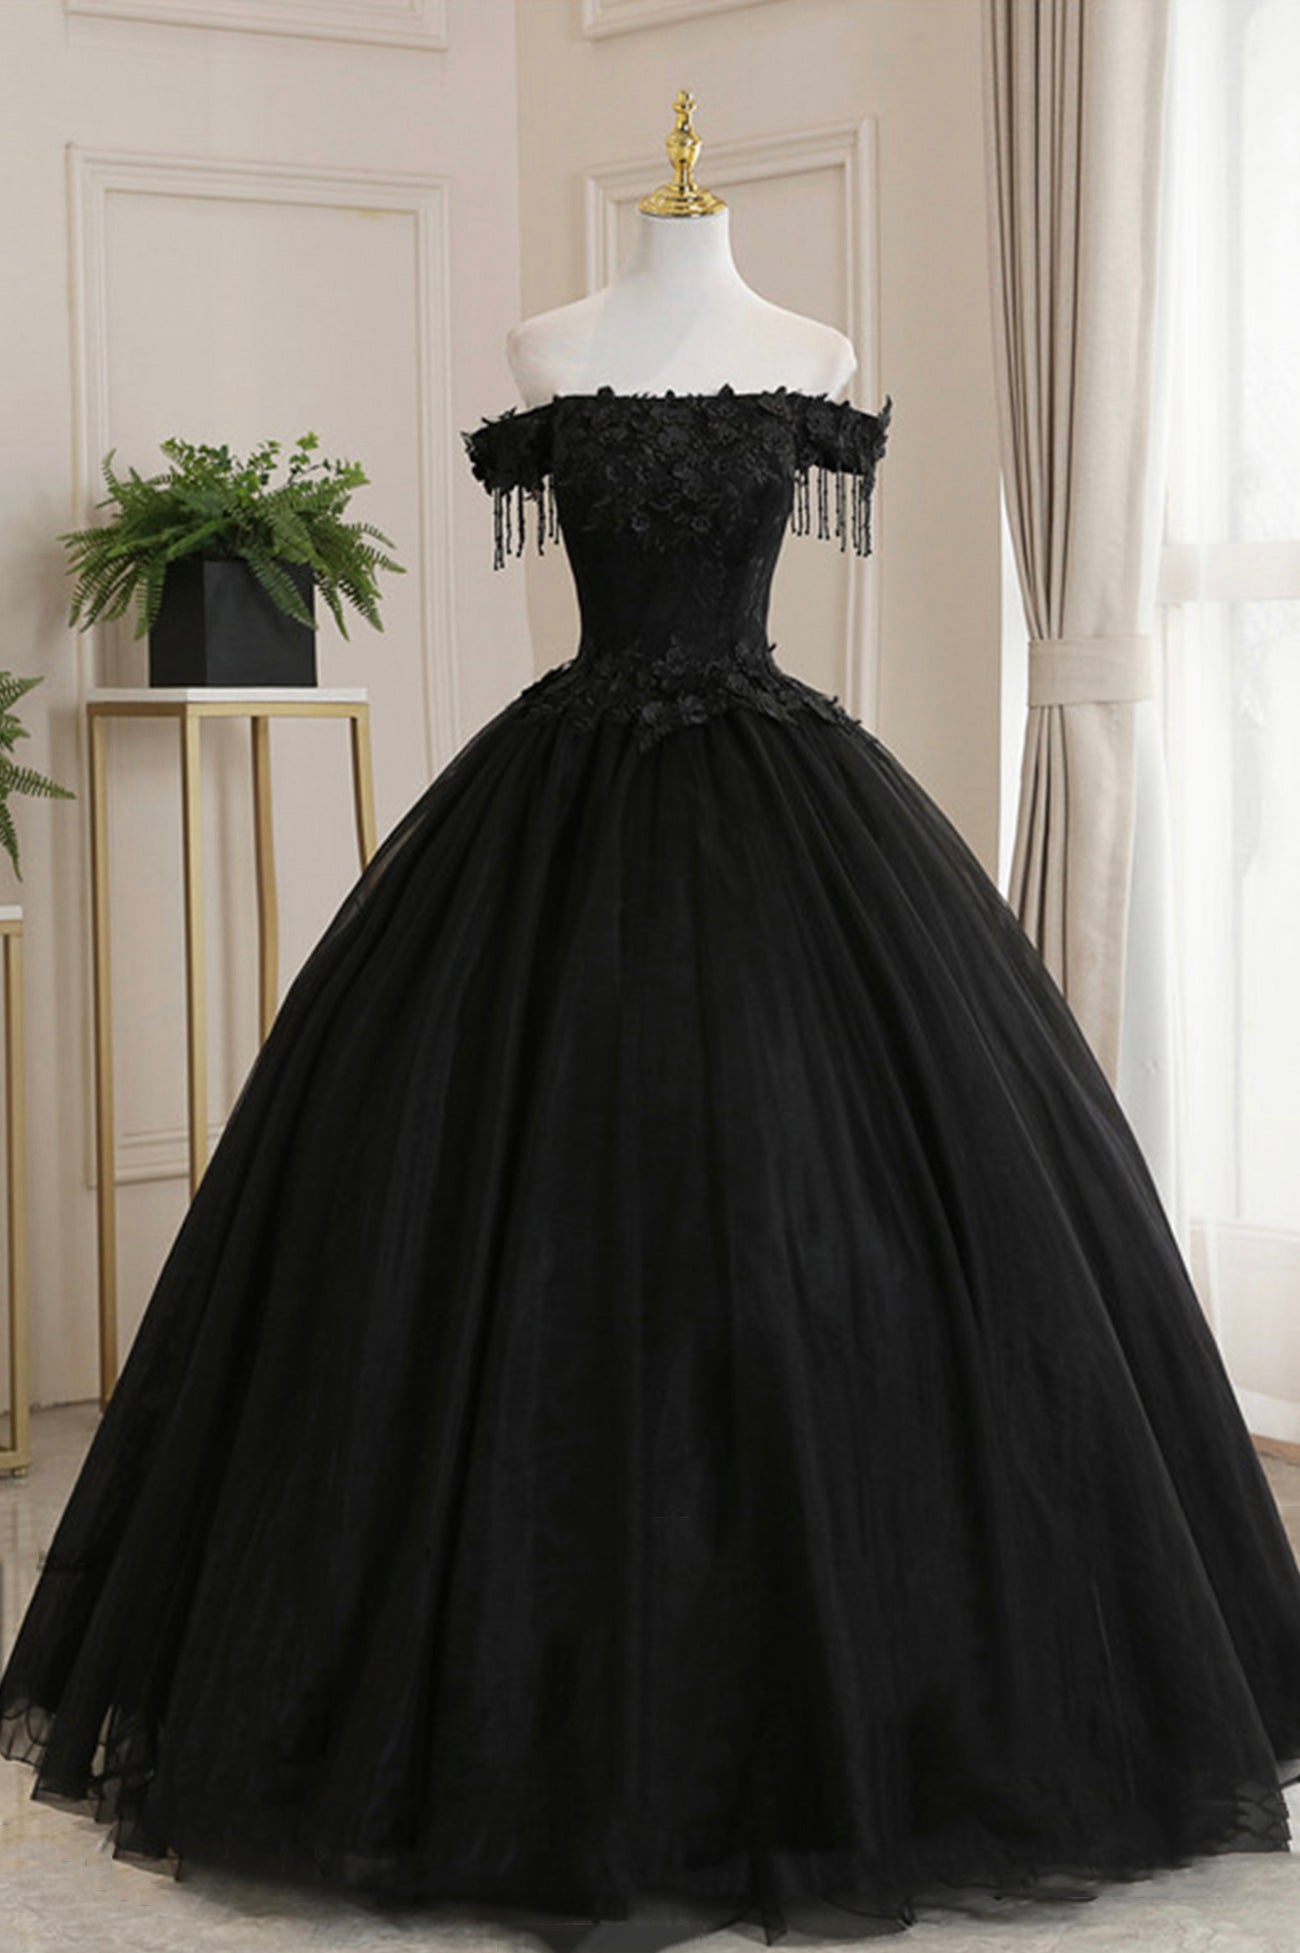 Black Tulle Lace Off the Shoulder Corset Prom Dress, Black A-Line Evening Dress outfit, Bridesmaids Dresses For Beach Wedding